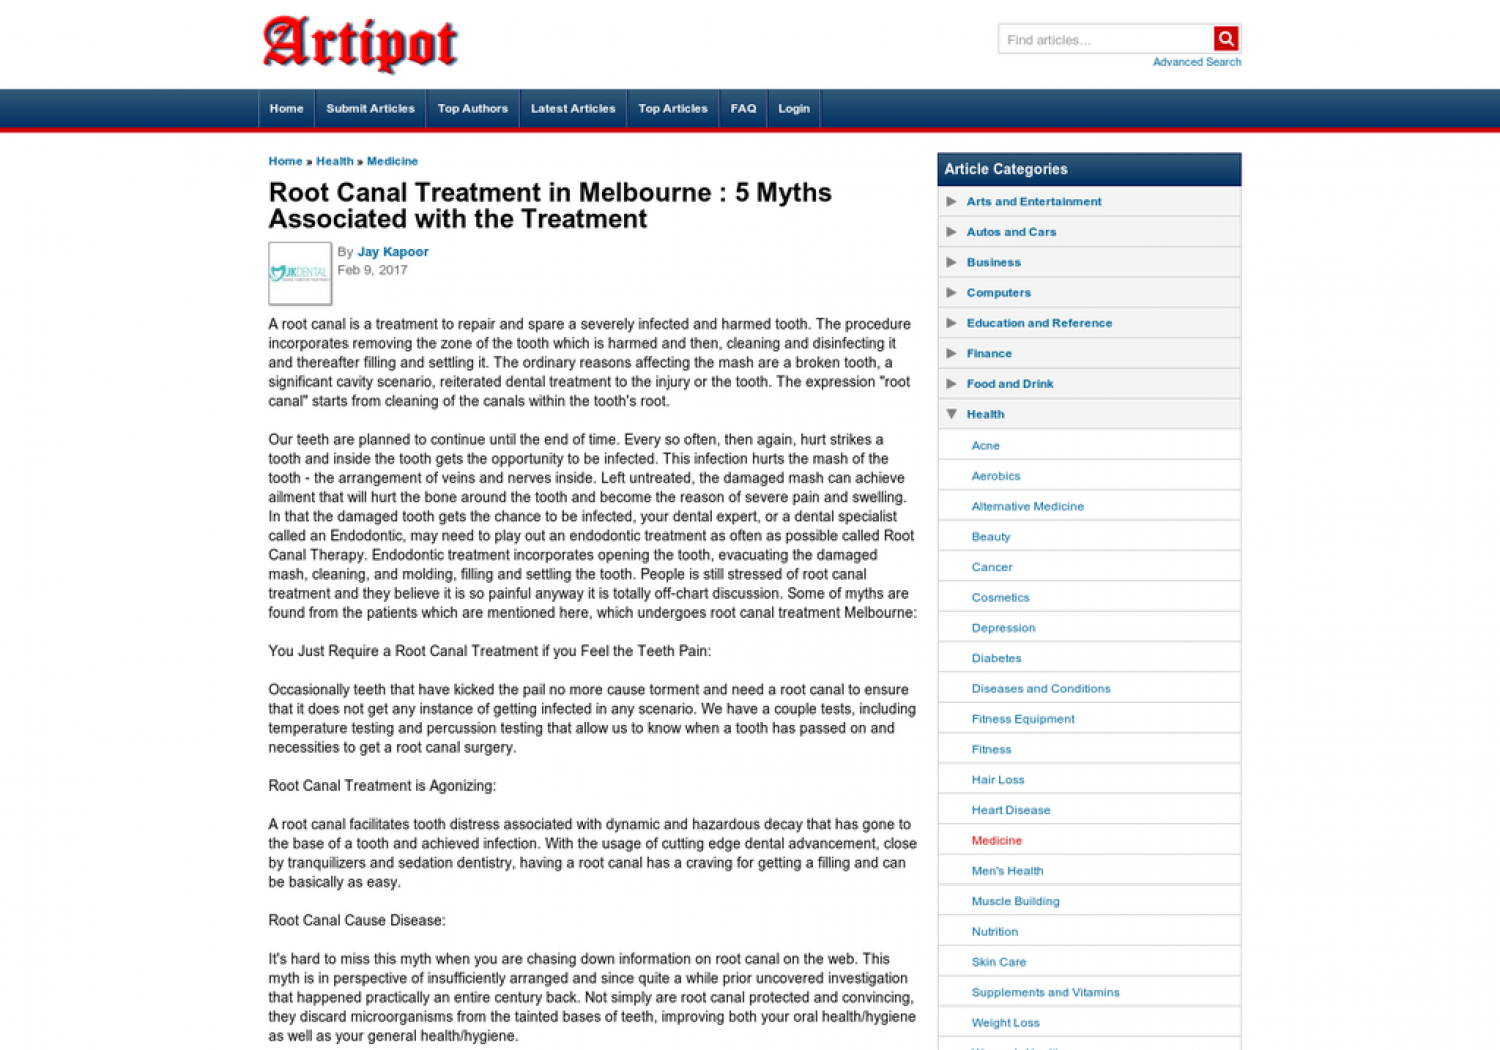 Root Canal Treatment in Melbourne : 5 Myths Associated with the Treatment Infographic